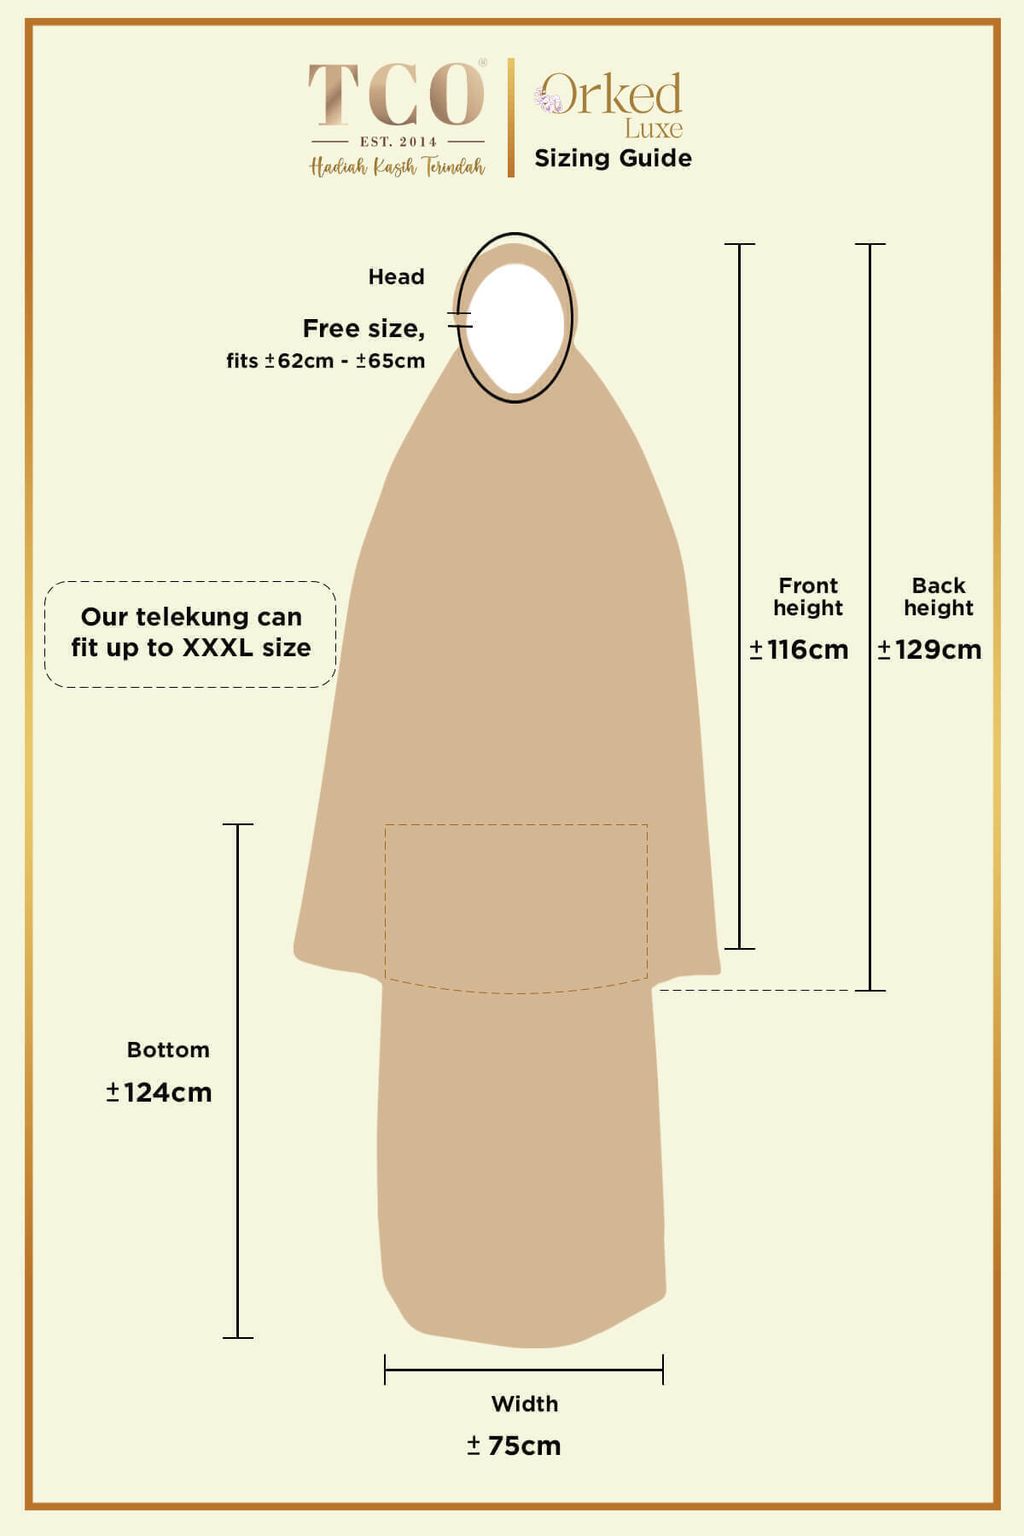 Telekung Orked Luxe by TCO - Sizing guide